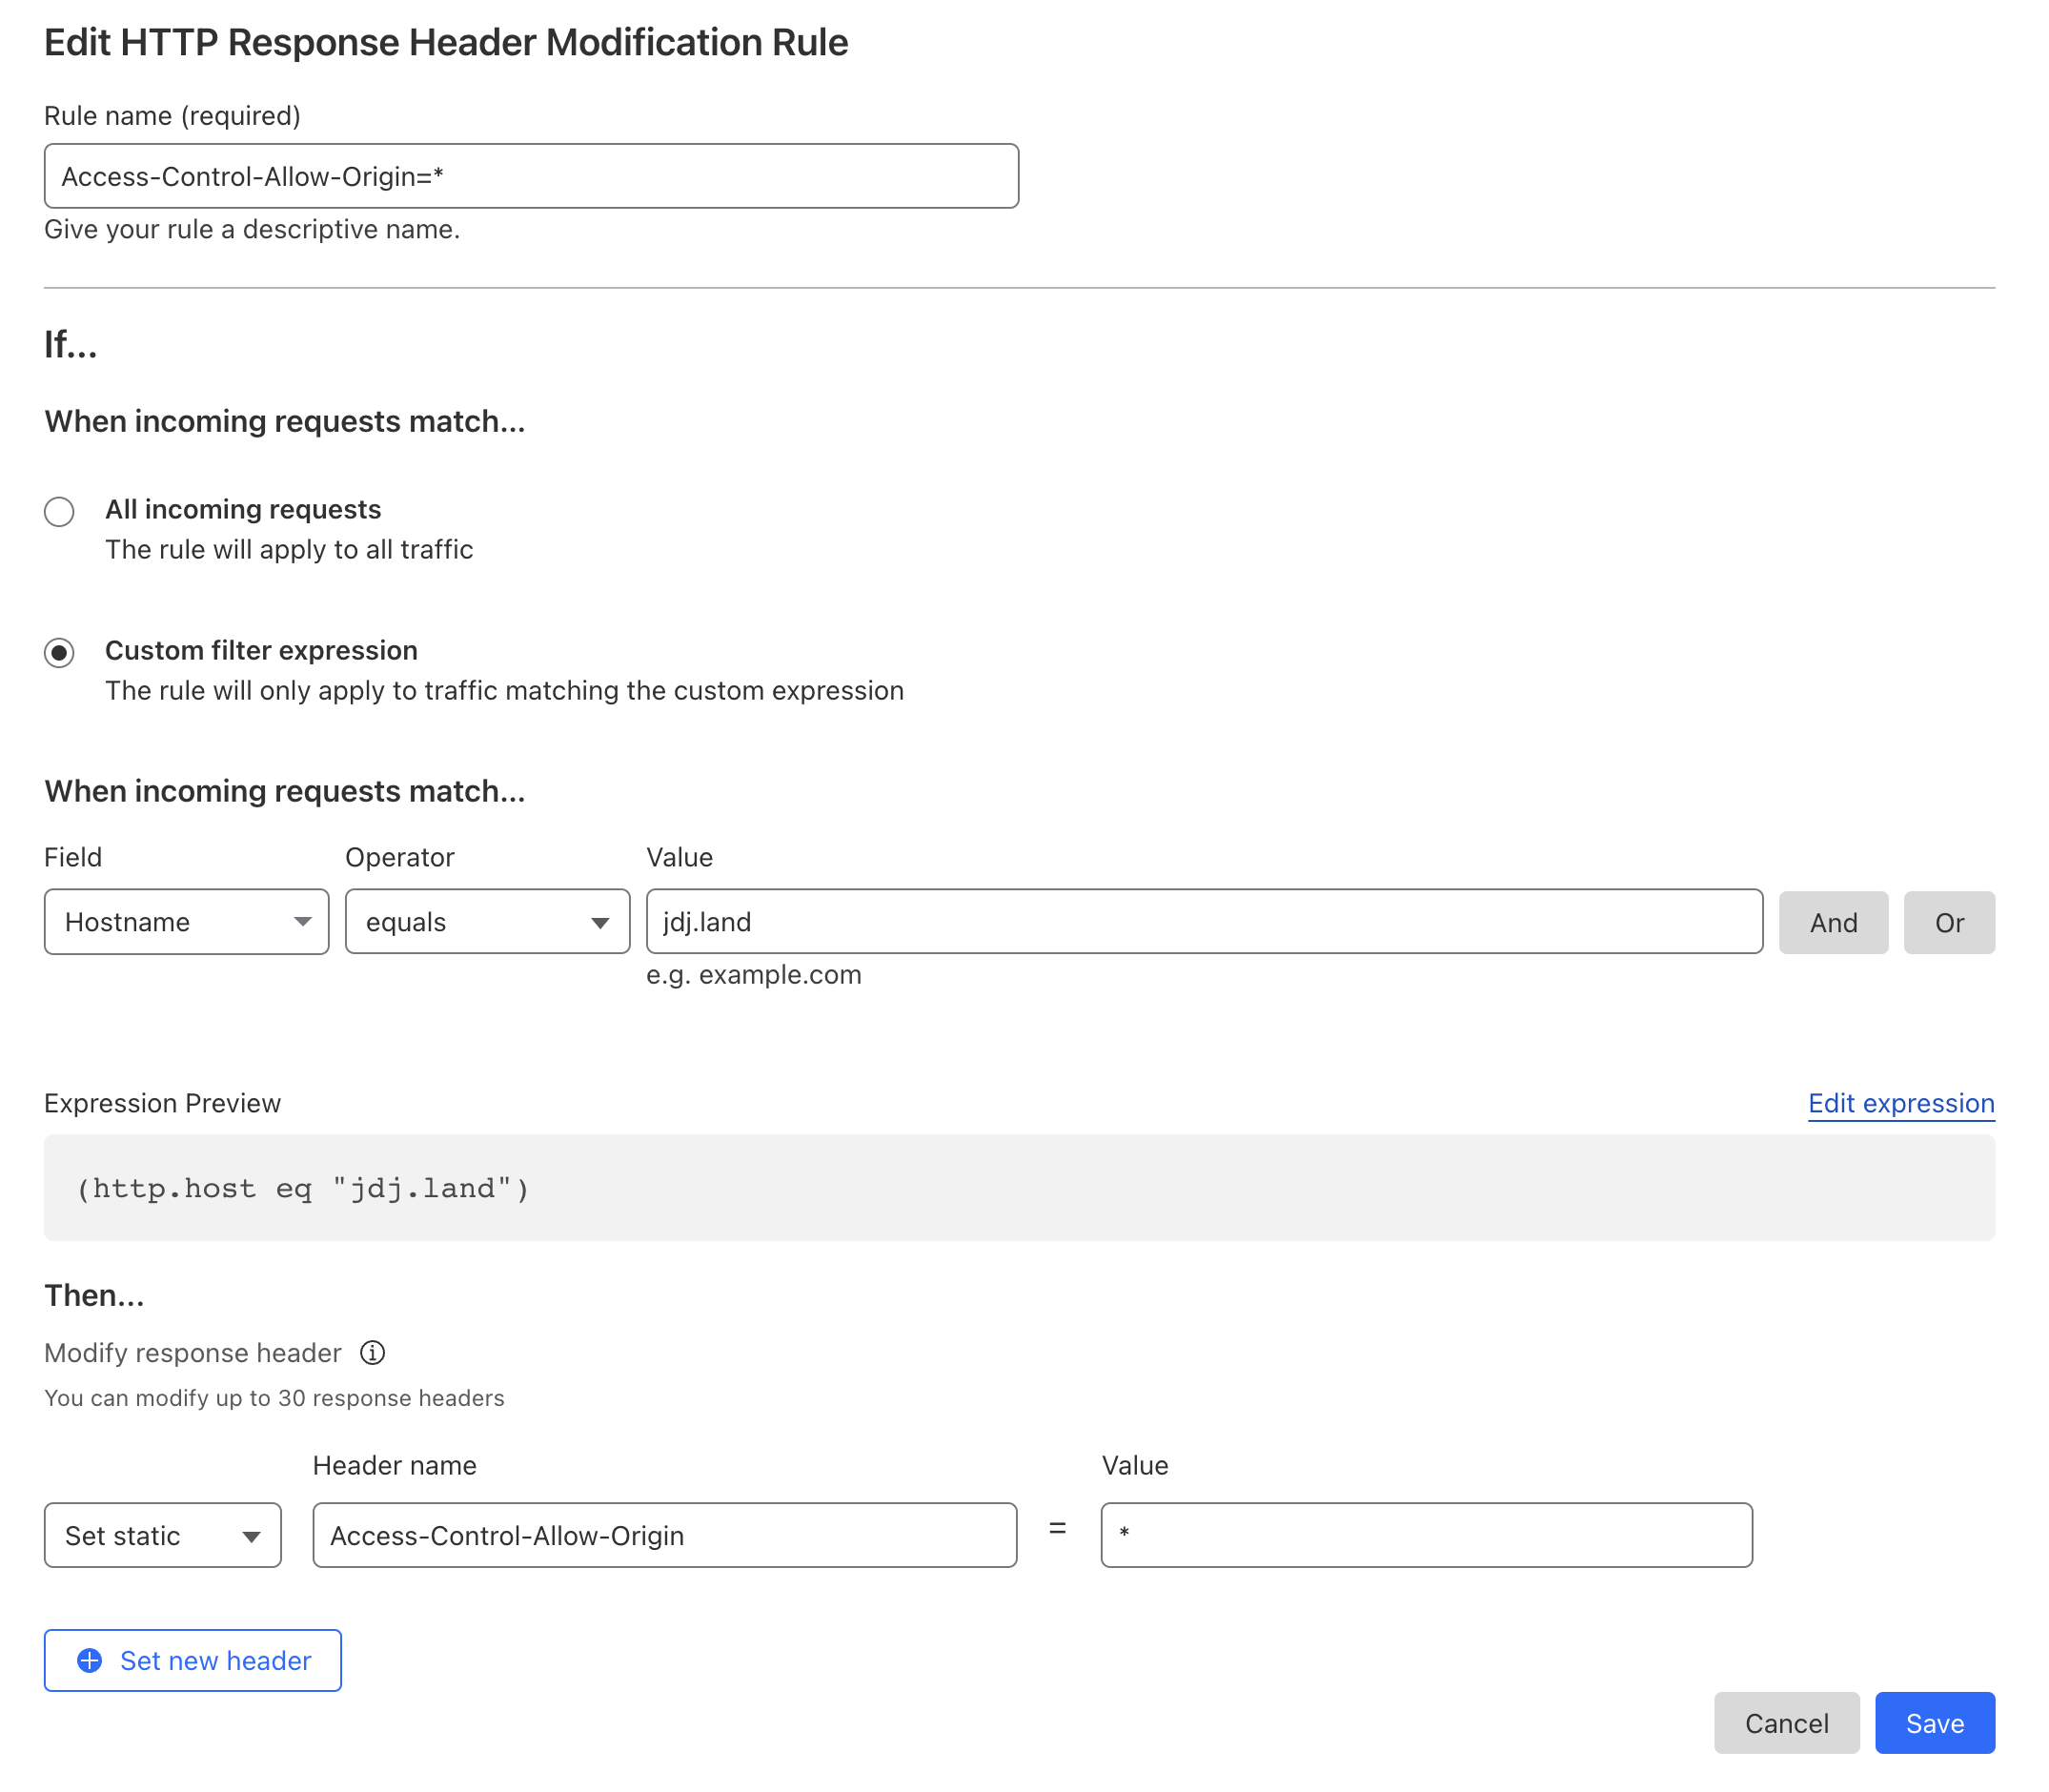 Screenshot of the HTTP Response Header Modification Rule form filled out